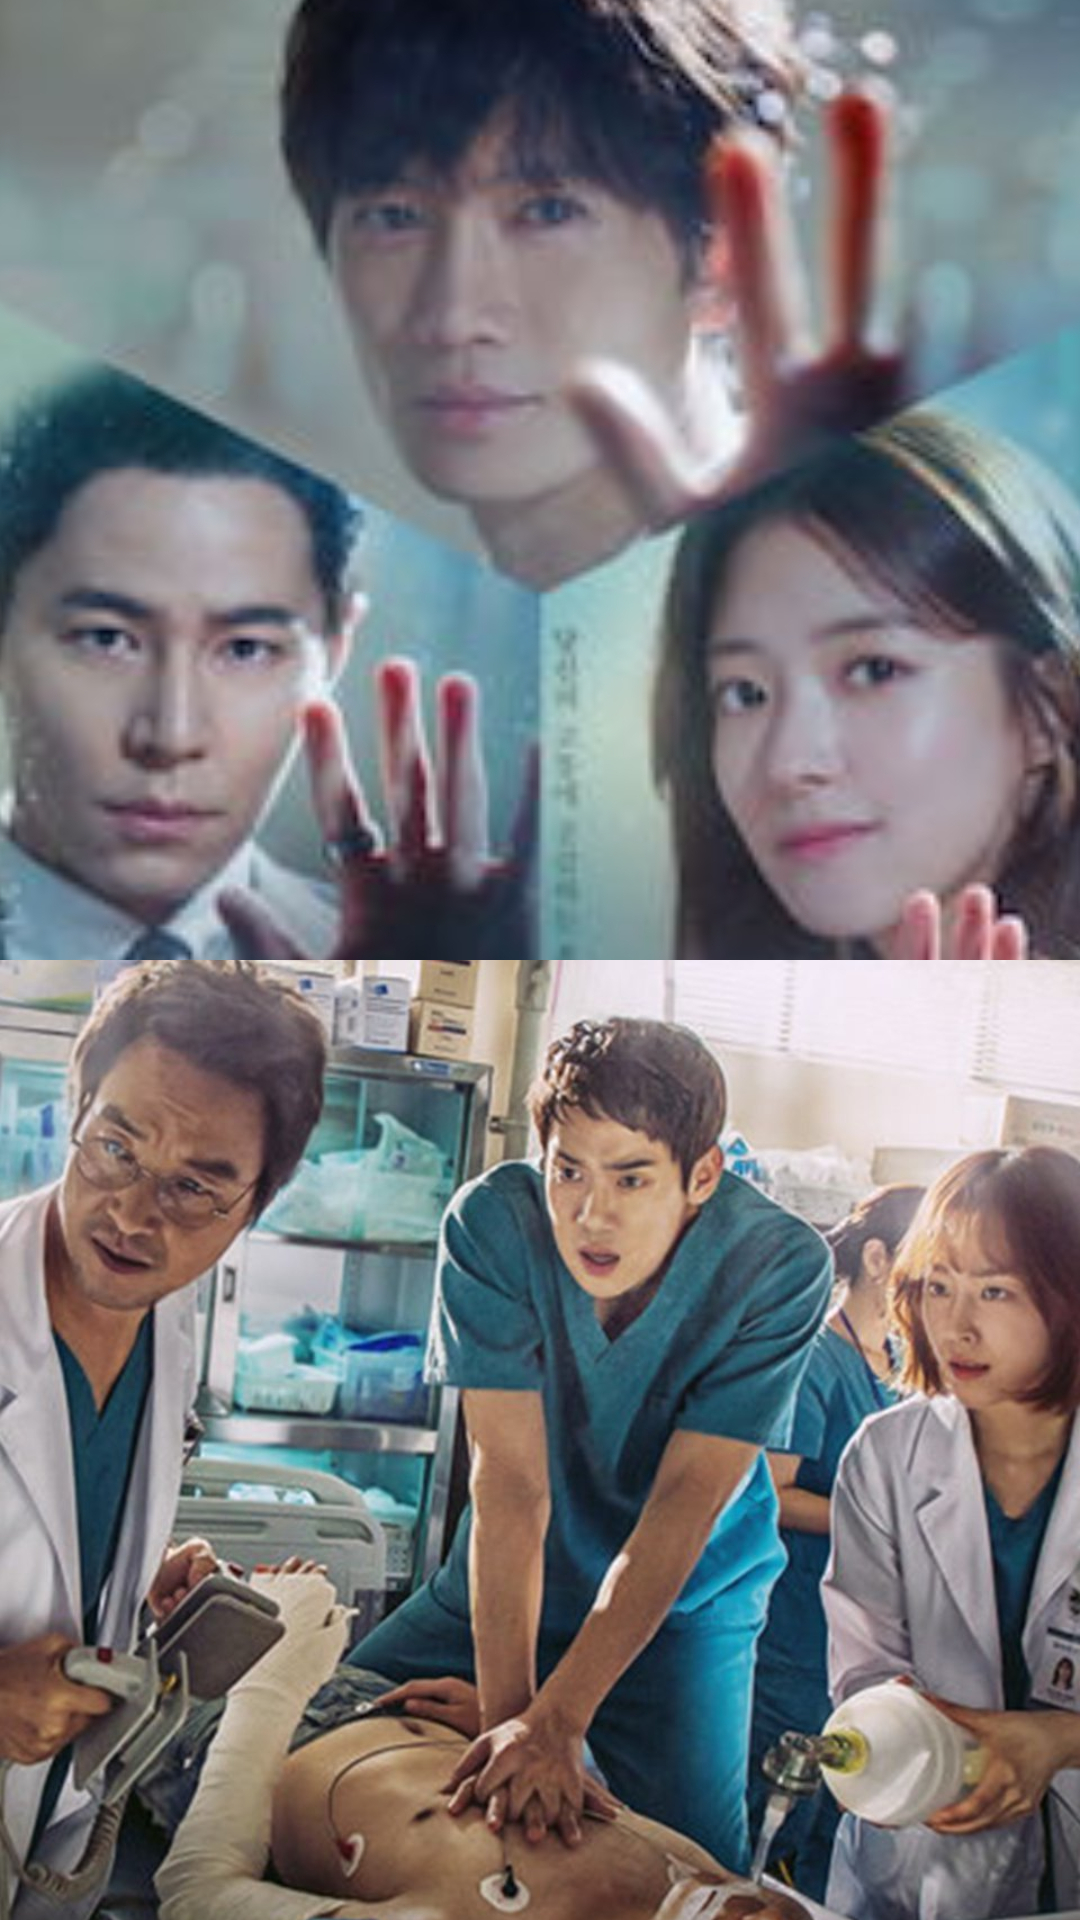 Dr John to Dr Romantic: 7 Korean Medical Dramas you should add to your watchlist